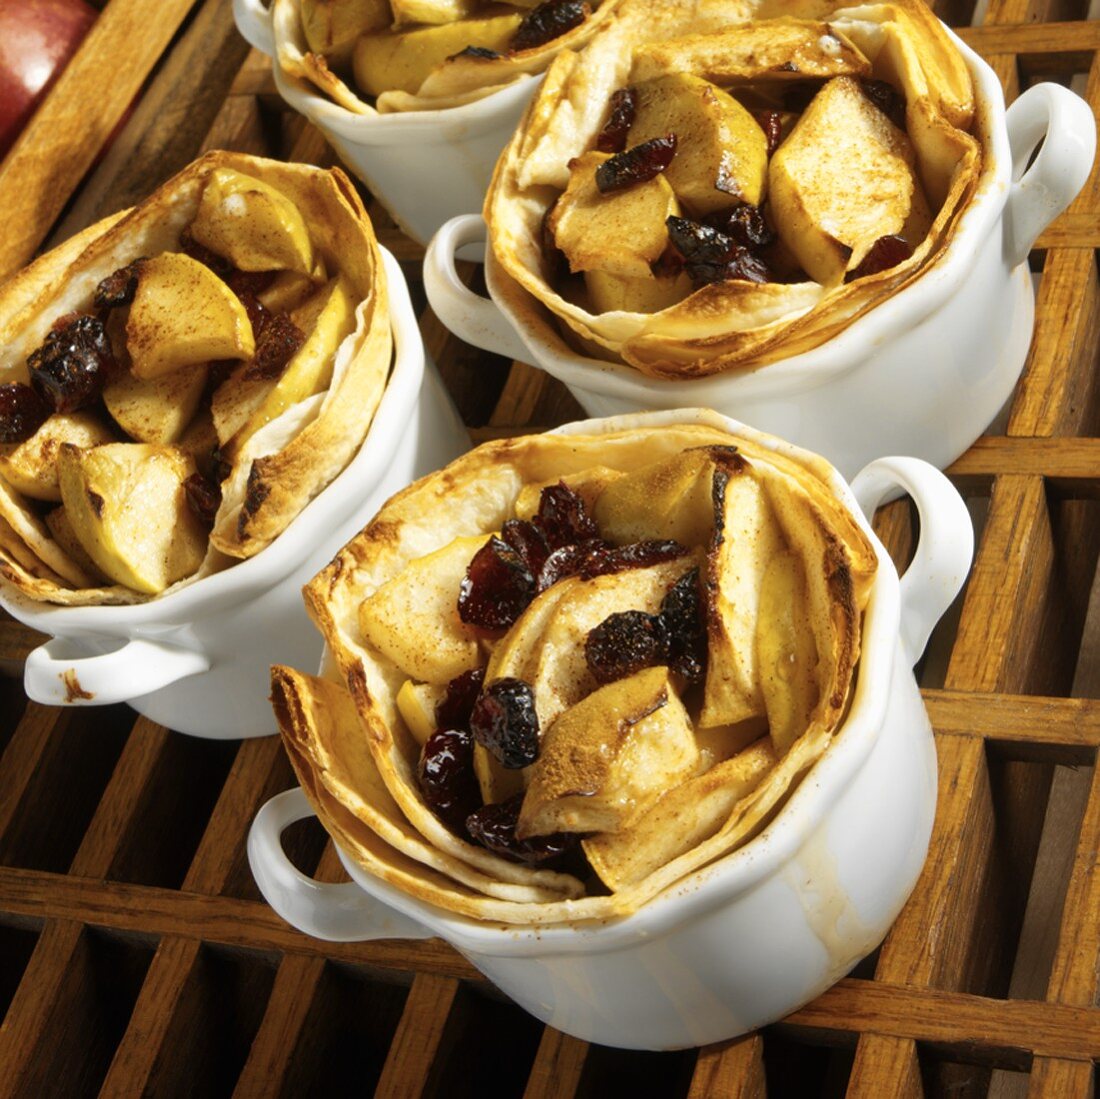 Apples, Dried Cranberries, Maple Syrup and Cinnamon in a Tortilla Shell